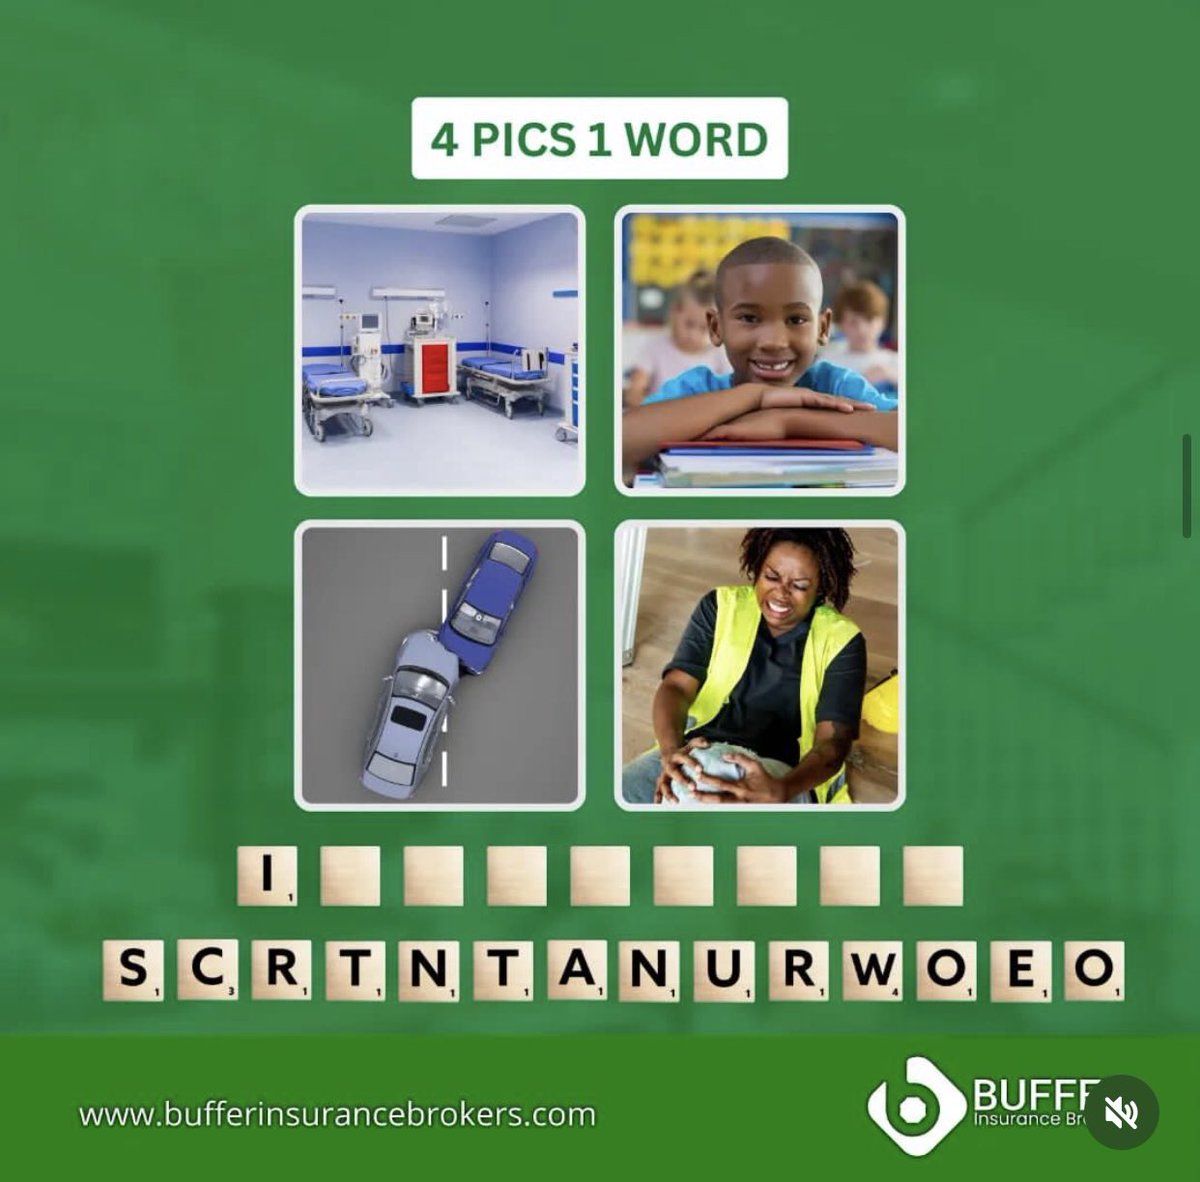 Try to guess the word that starts with the letter 'I'. This word connects or is related to all the pictures in the image above.

Have fun at it and happy weekend.

#FridayTrivia #TriviaNight #FridayFunFacts #FridayQuiz #FridayBrainTeasers #TriviaChallenge #FridayPuzzle